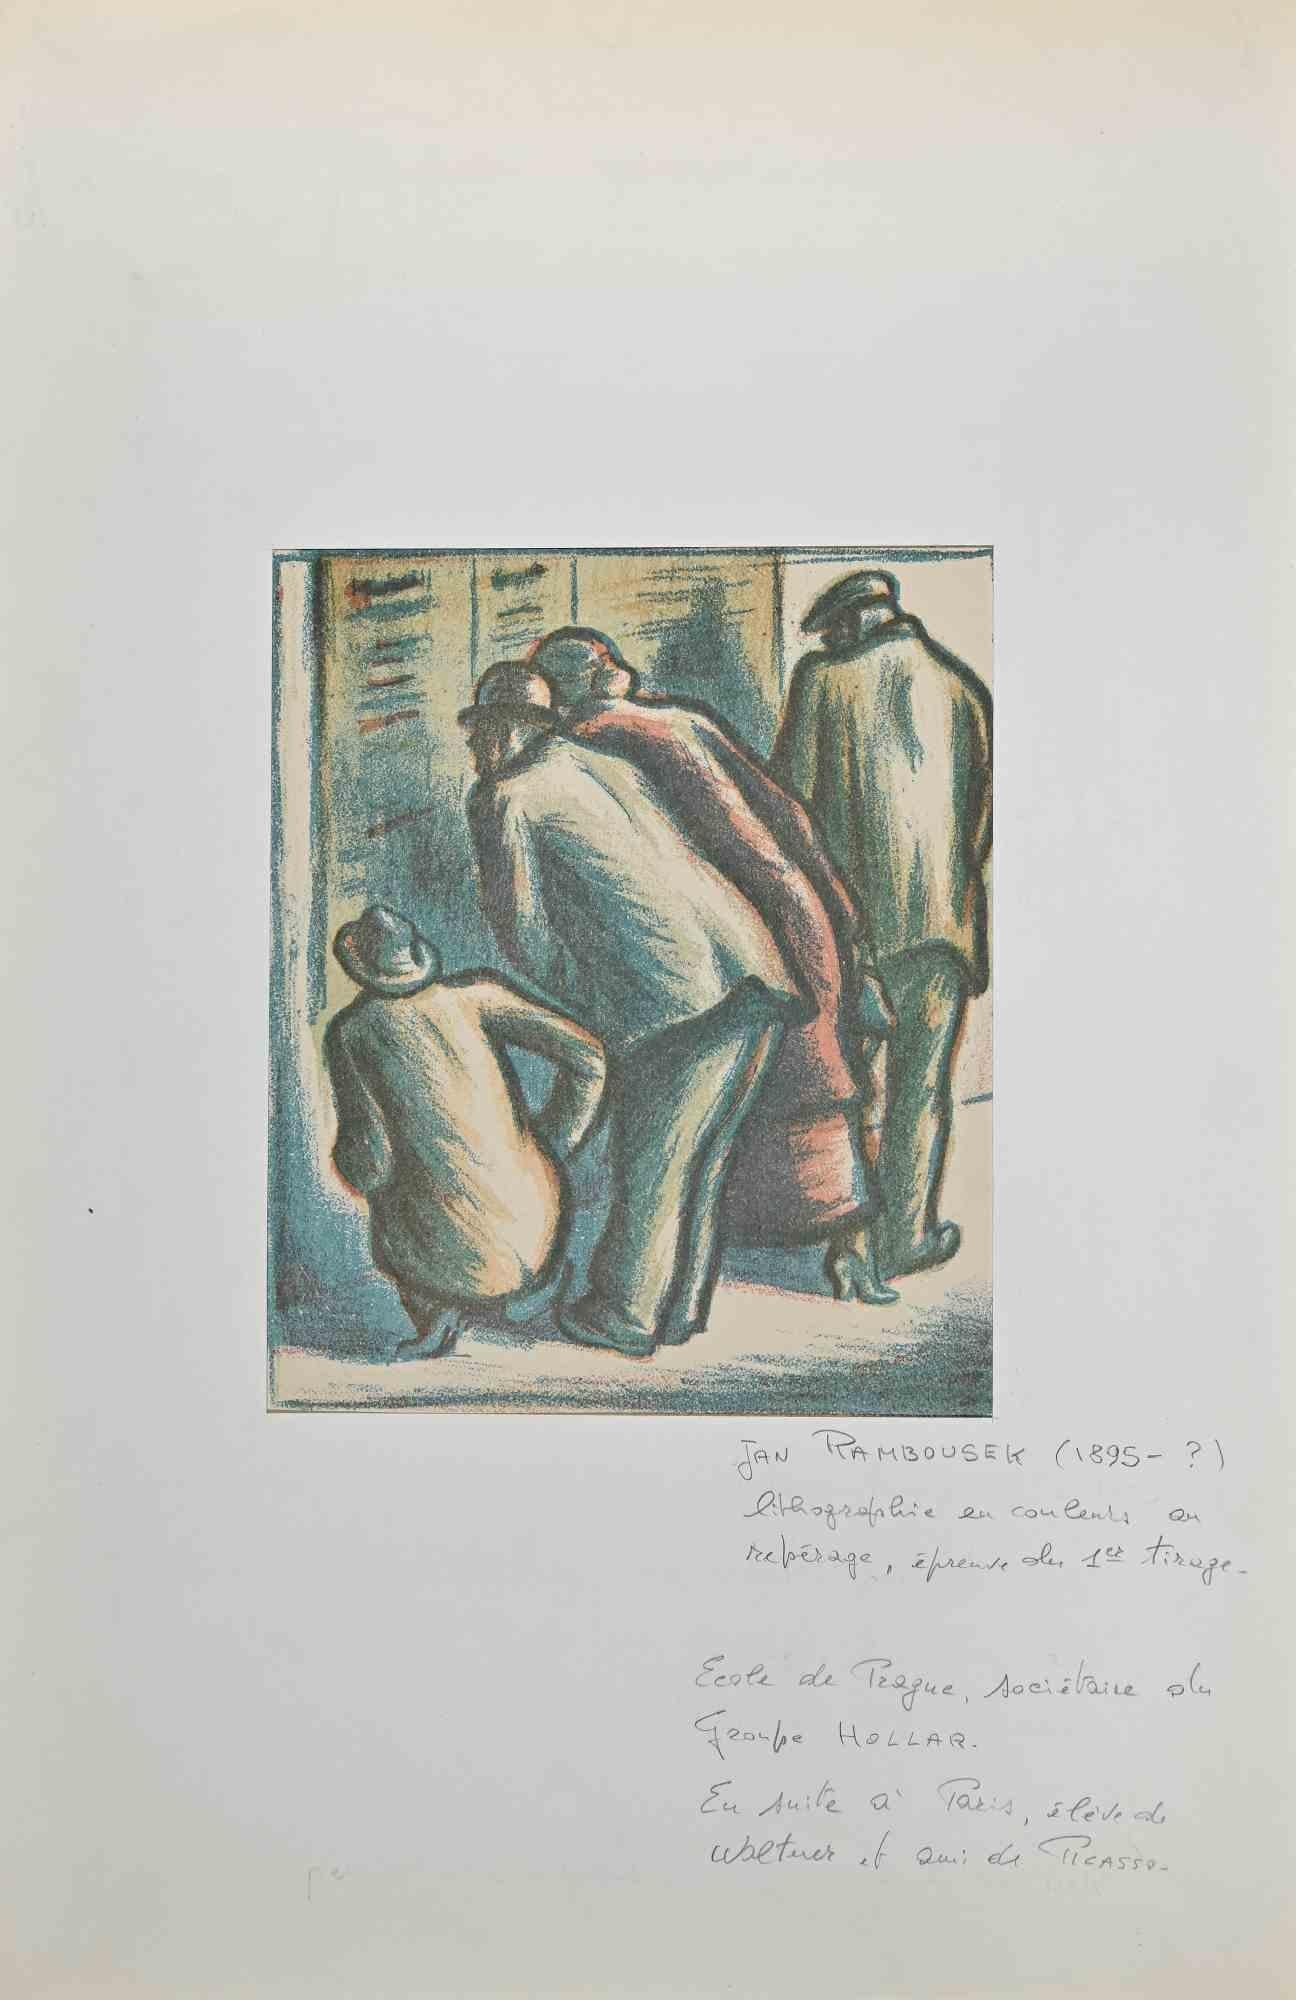 The Men Peeping Through is an original Lithograph print realized by Jan Rambousek ( 1895- ?).

Good conditions.

Applied on a white Passepartout.

The artwork is realized in a well-balanced composition through harmonious colors.